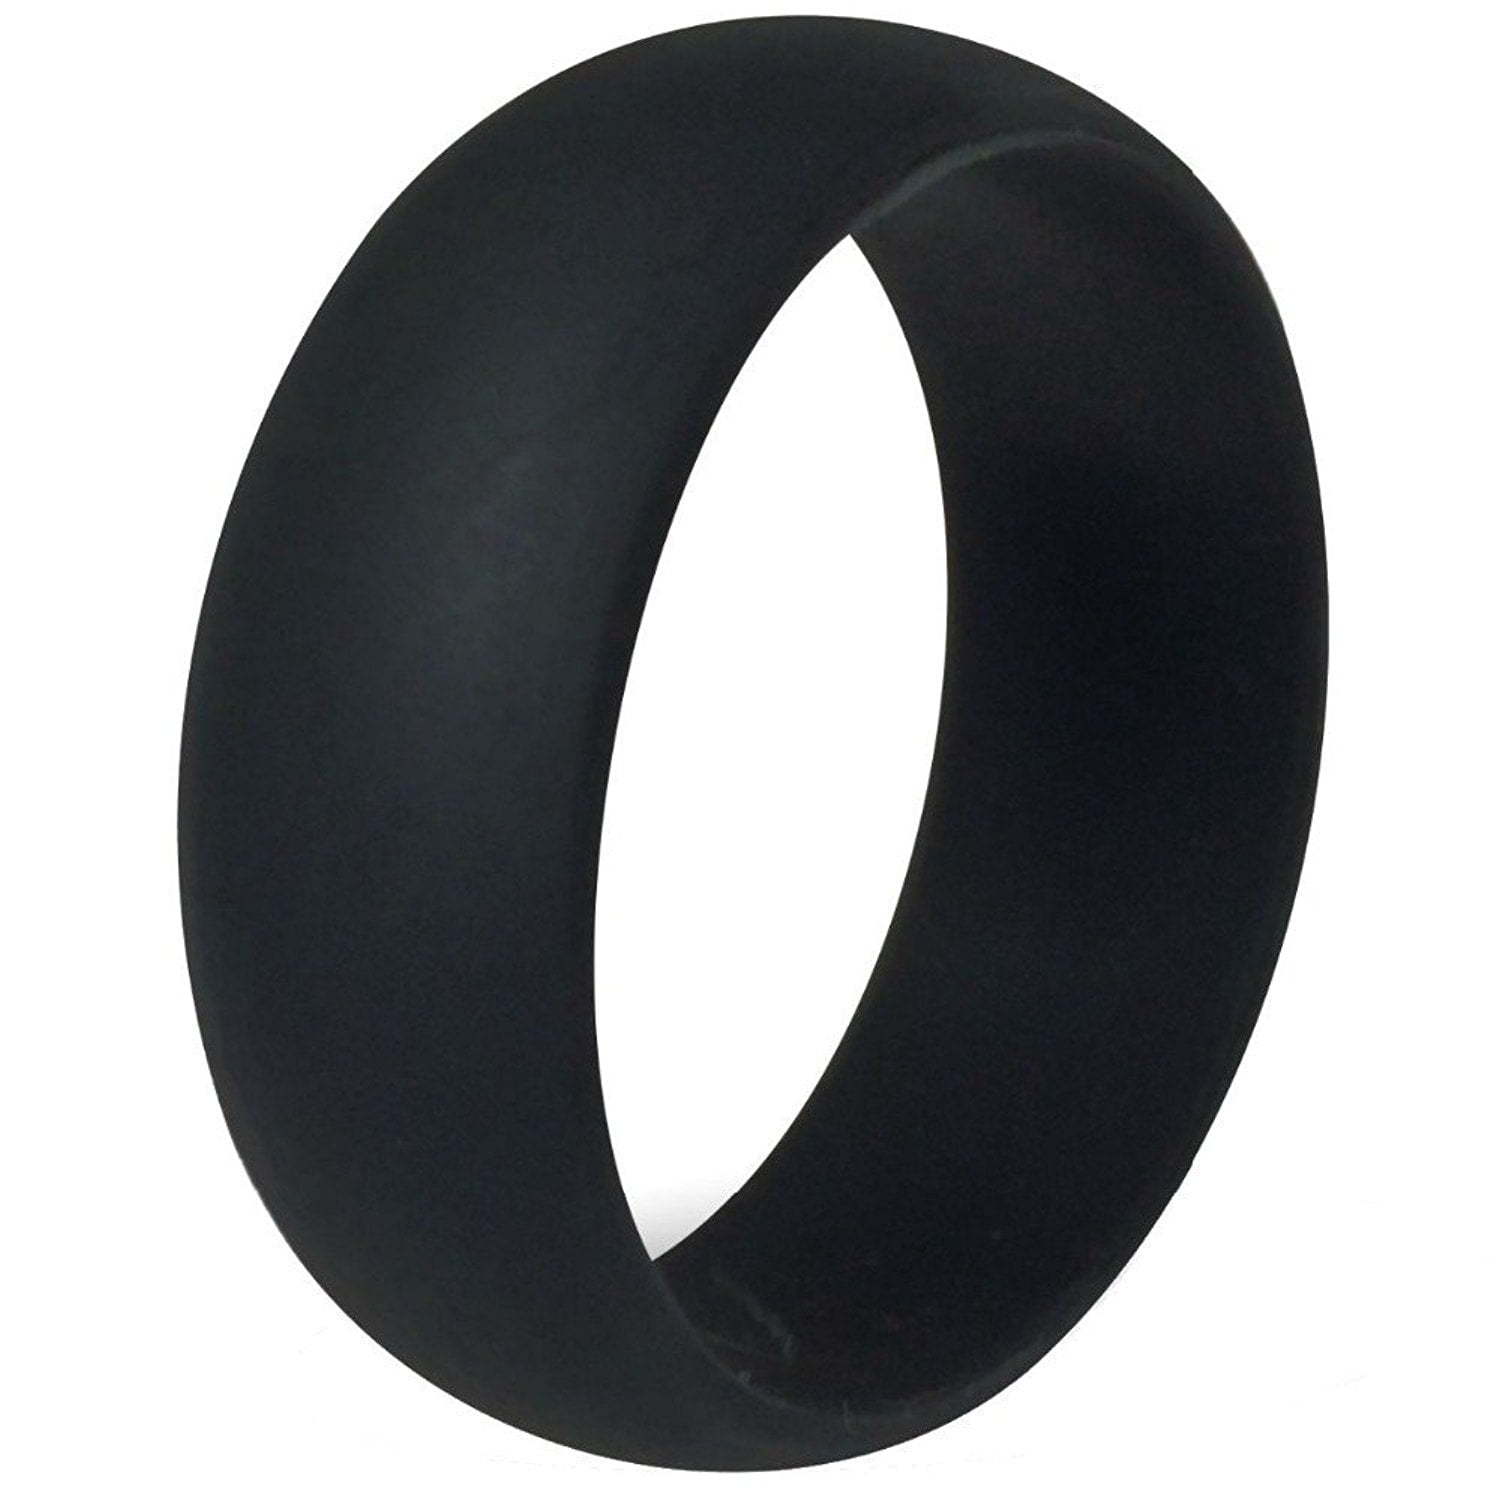 8.7 mm Wide |Thin Rubber Rings for Active Life Silicone Wedding Band for Men Flexible Silicon Rings Vin Zen Rubber Wedding Ring 